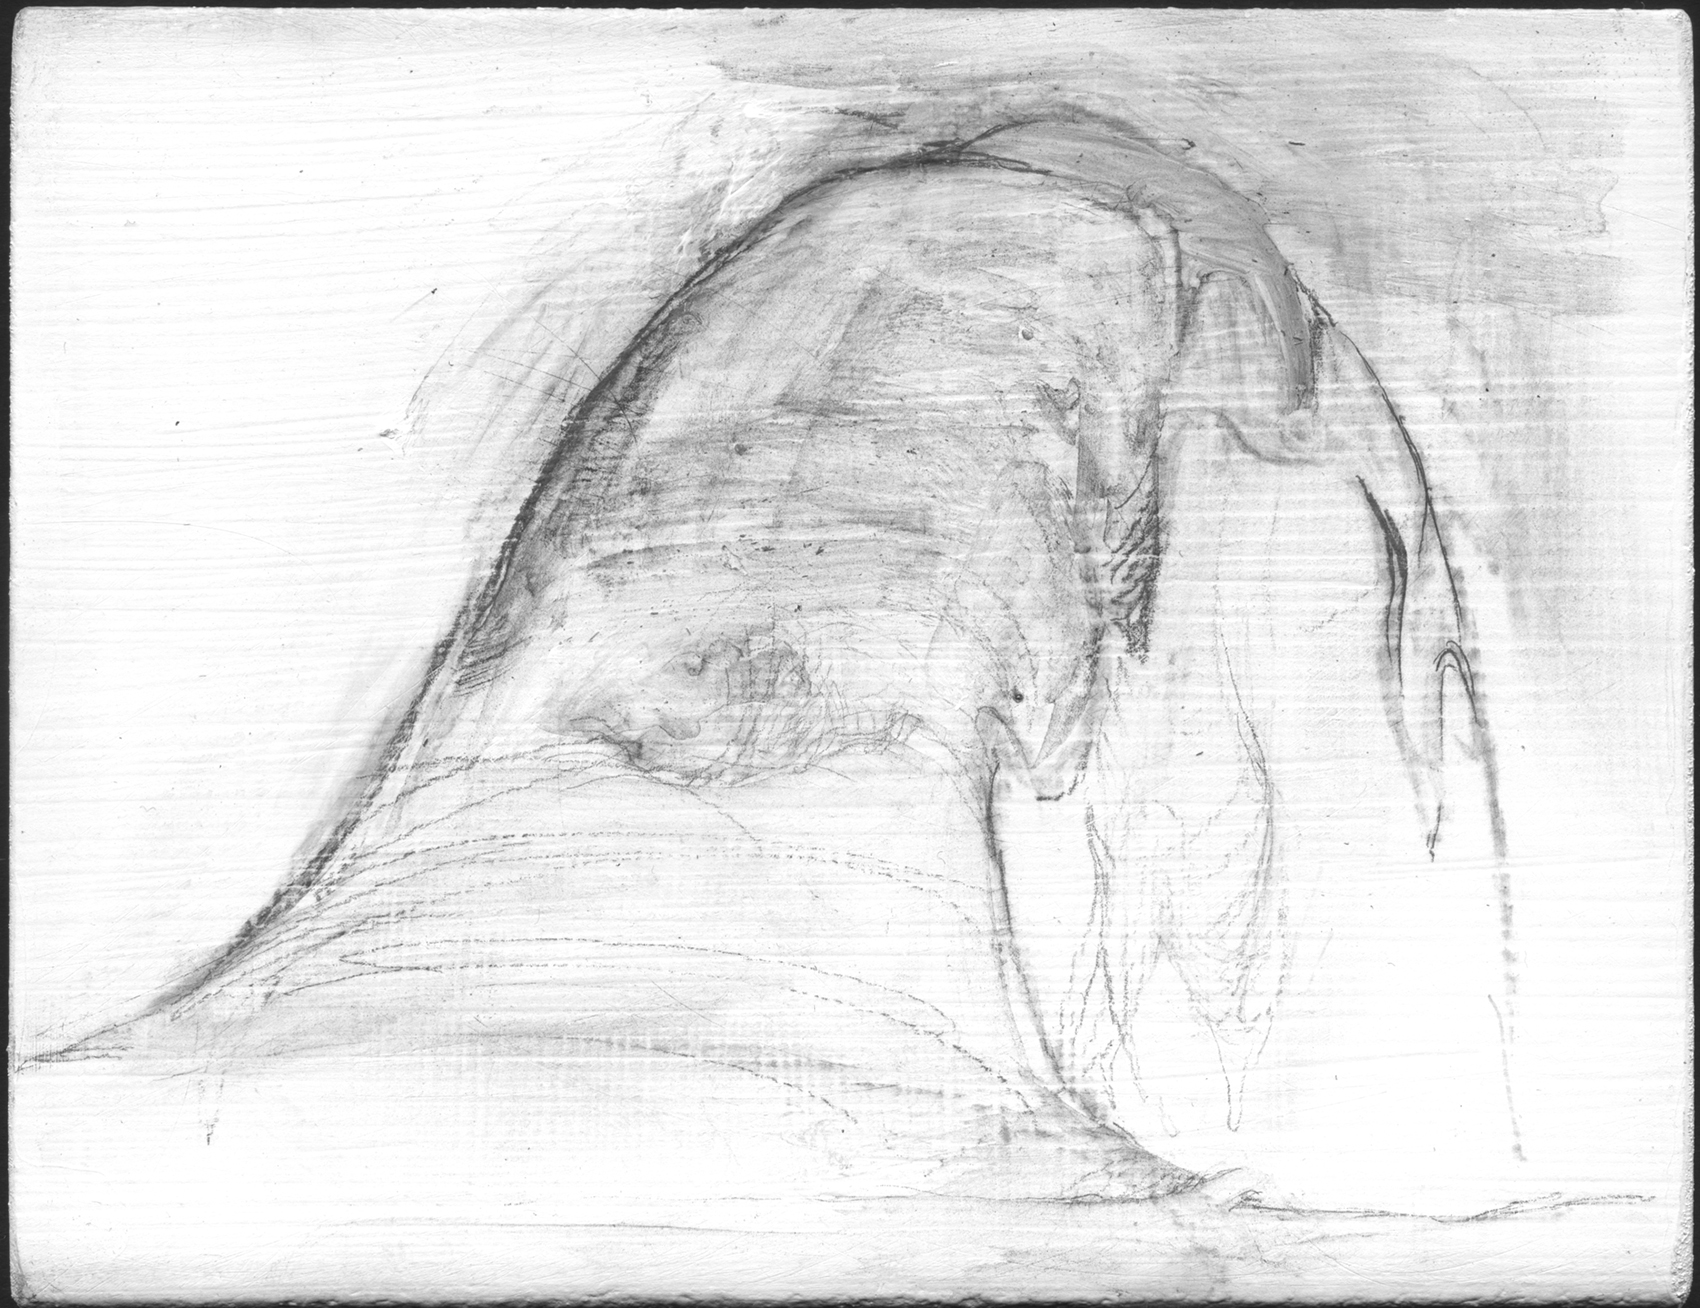    Covered with ice and snow   , 2008,   graphite on gessoed panel, 3 3/4 x 4 3/4 in.  